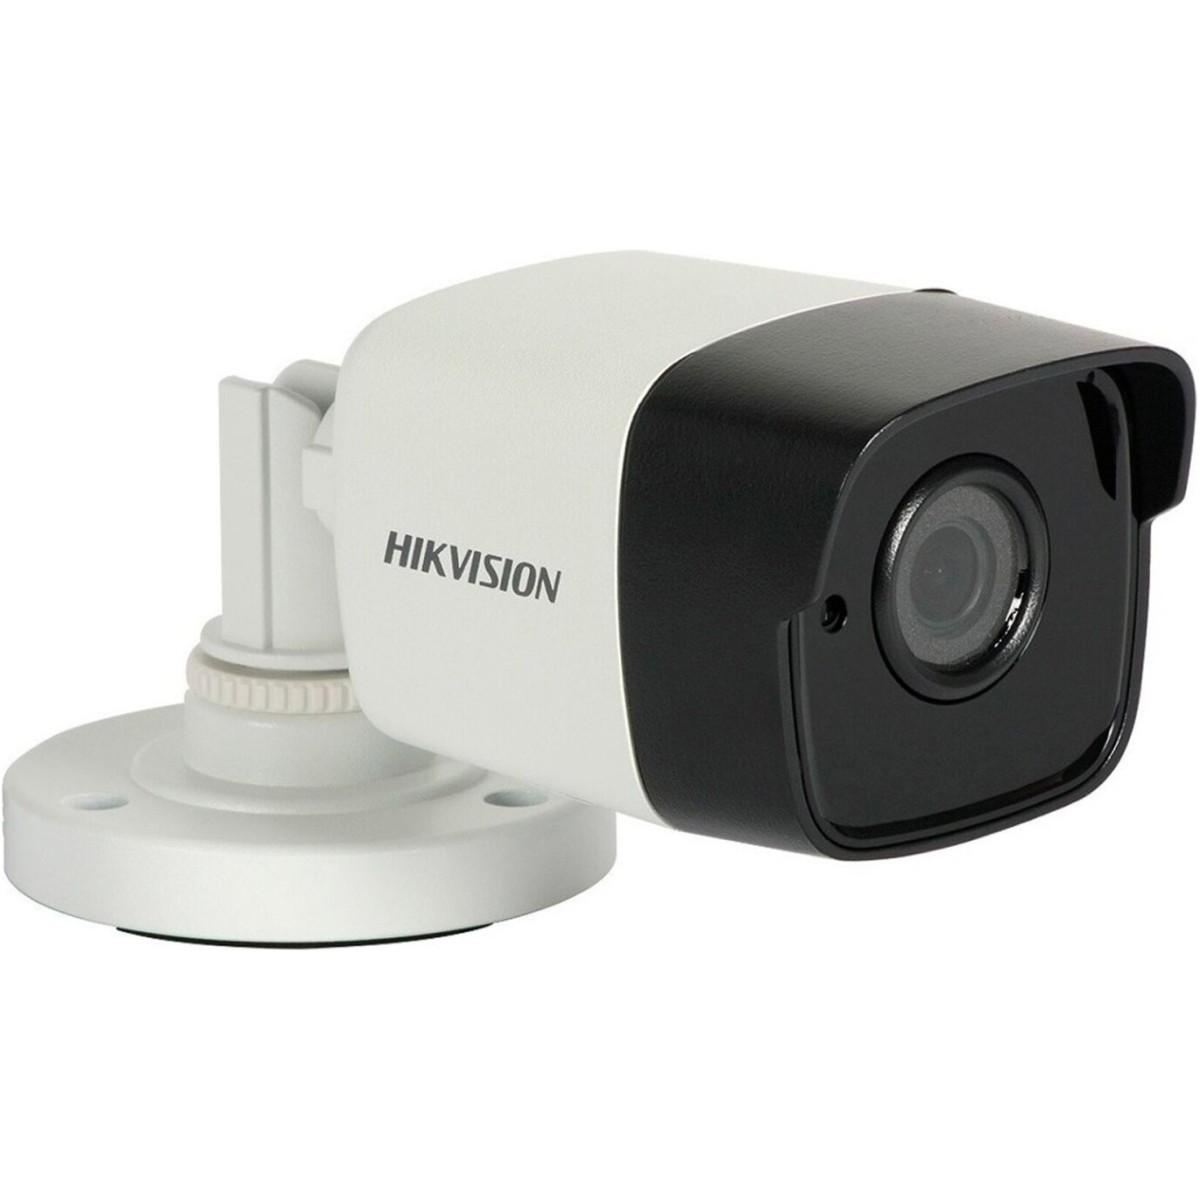 Камера Hikvision DS-2CE16D8T-ITF (3.6) 98_98.jpg - фото 1